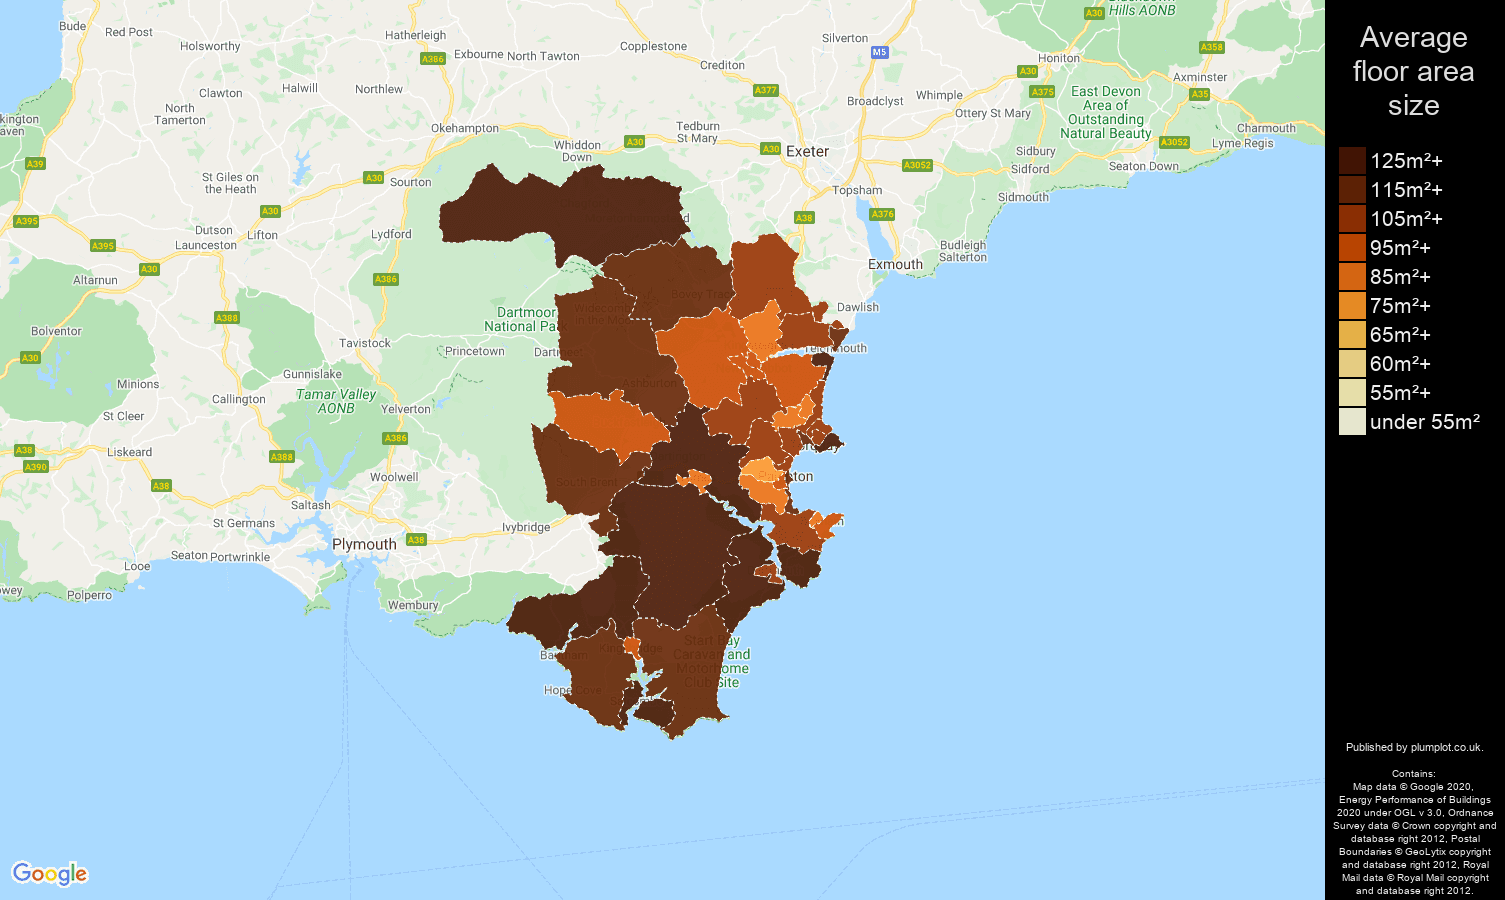 Torquay map of average floor area size of houses